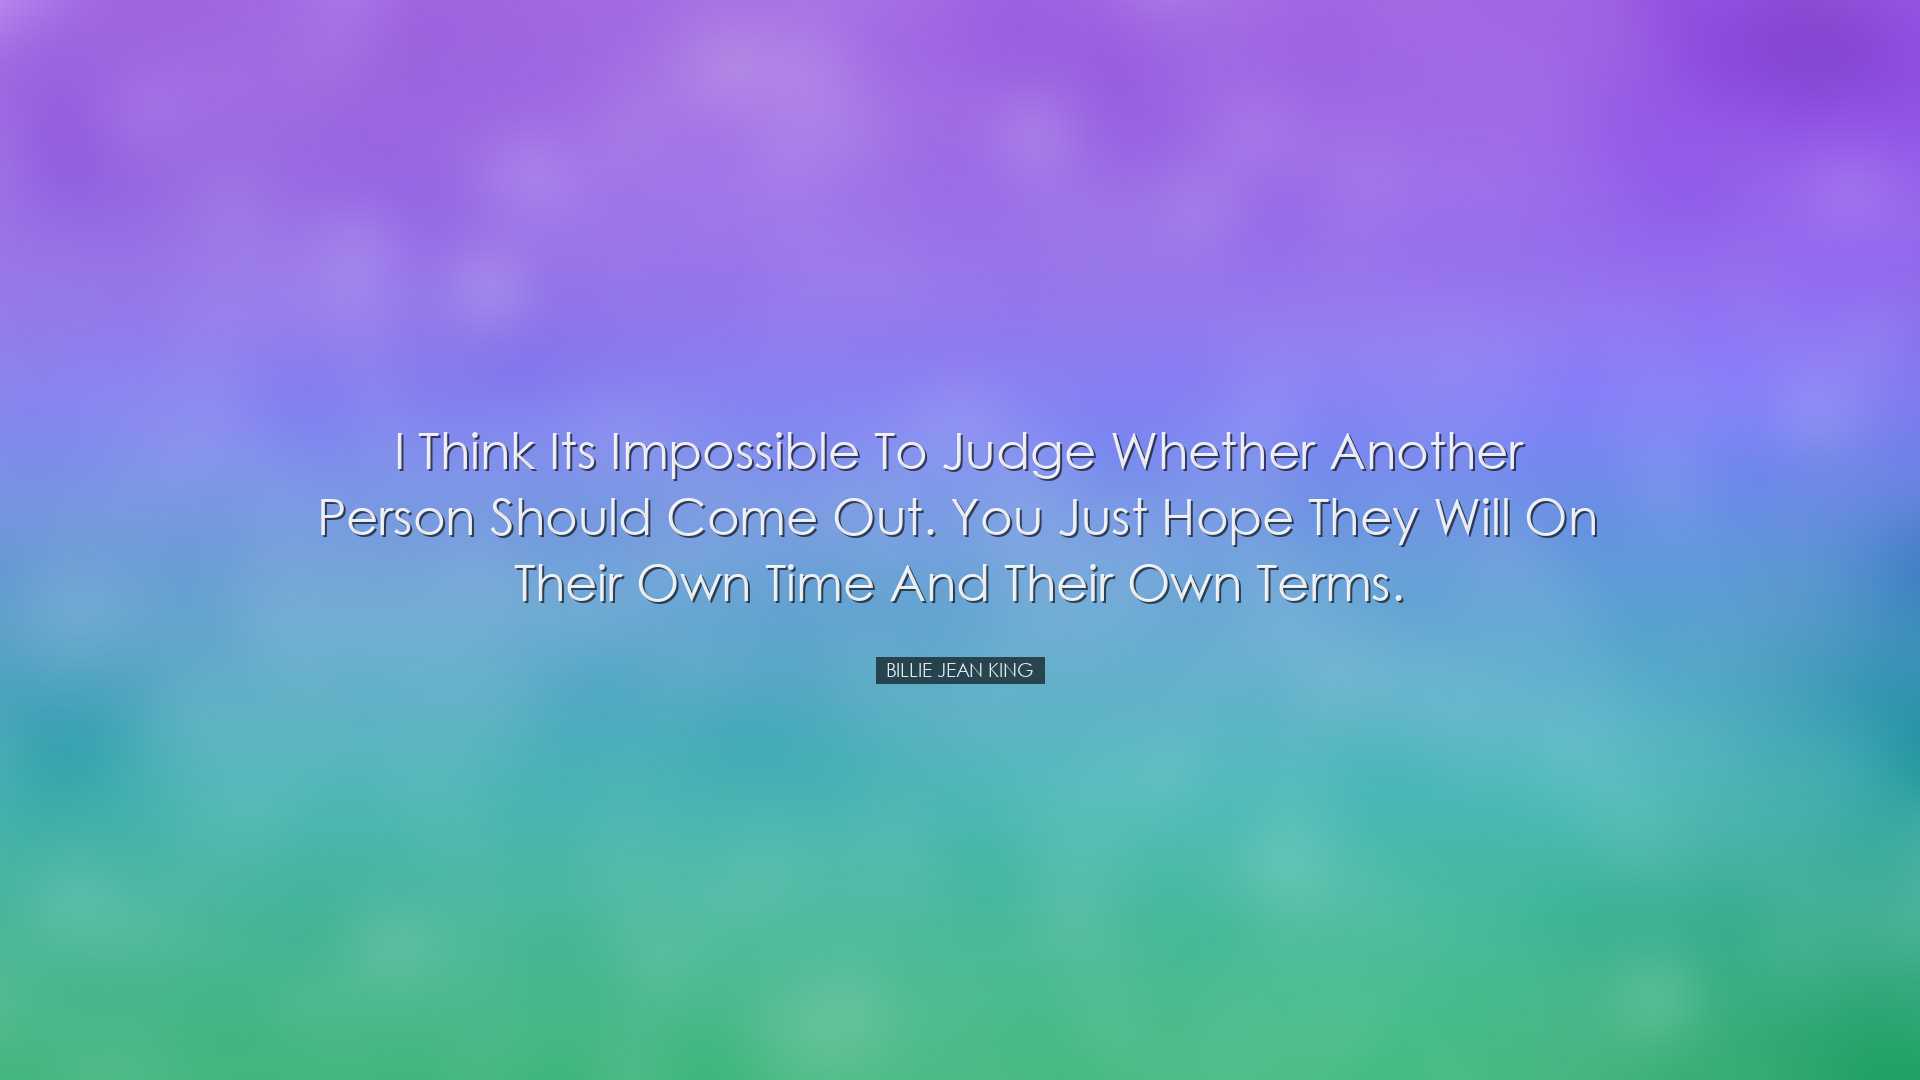 I think its impossible to judge whether another person should come